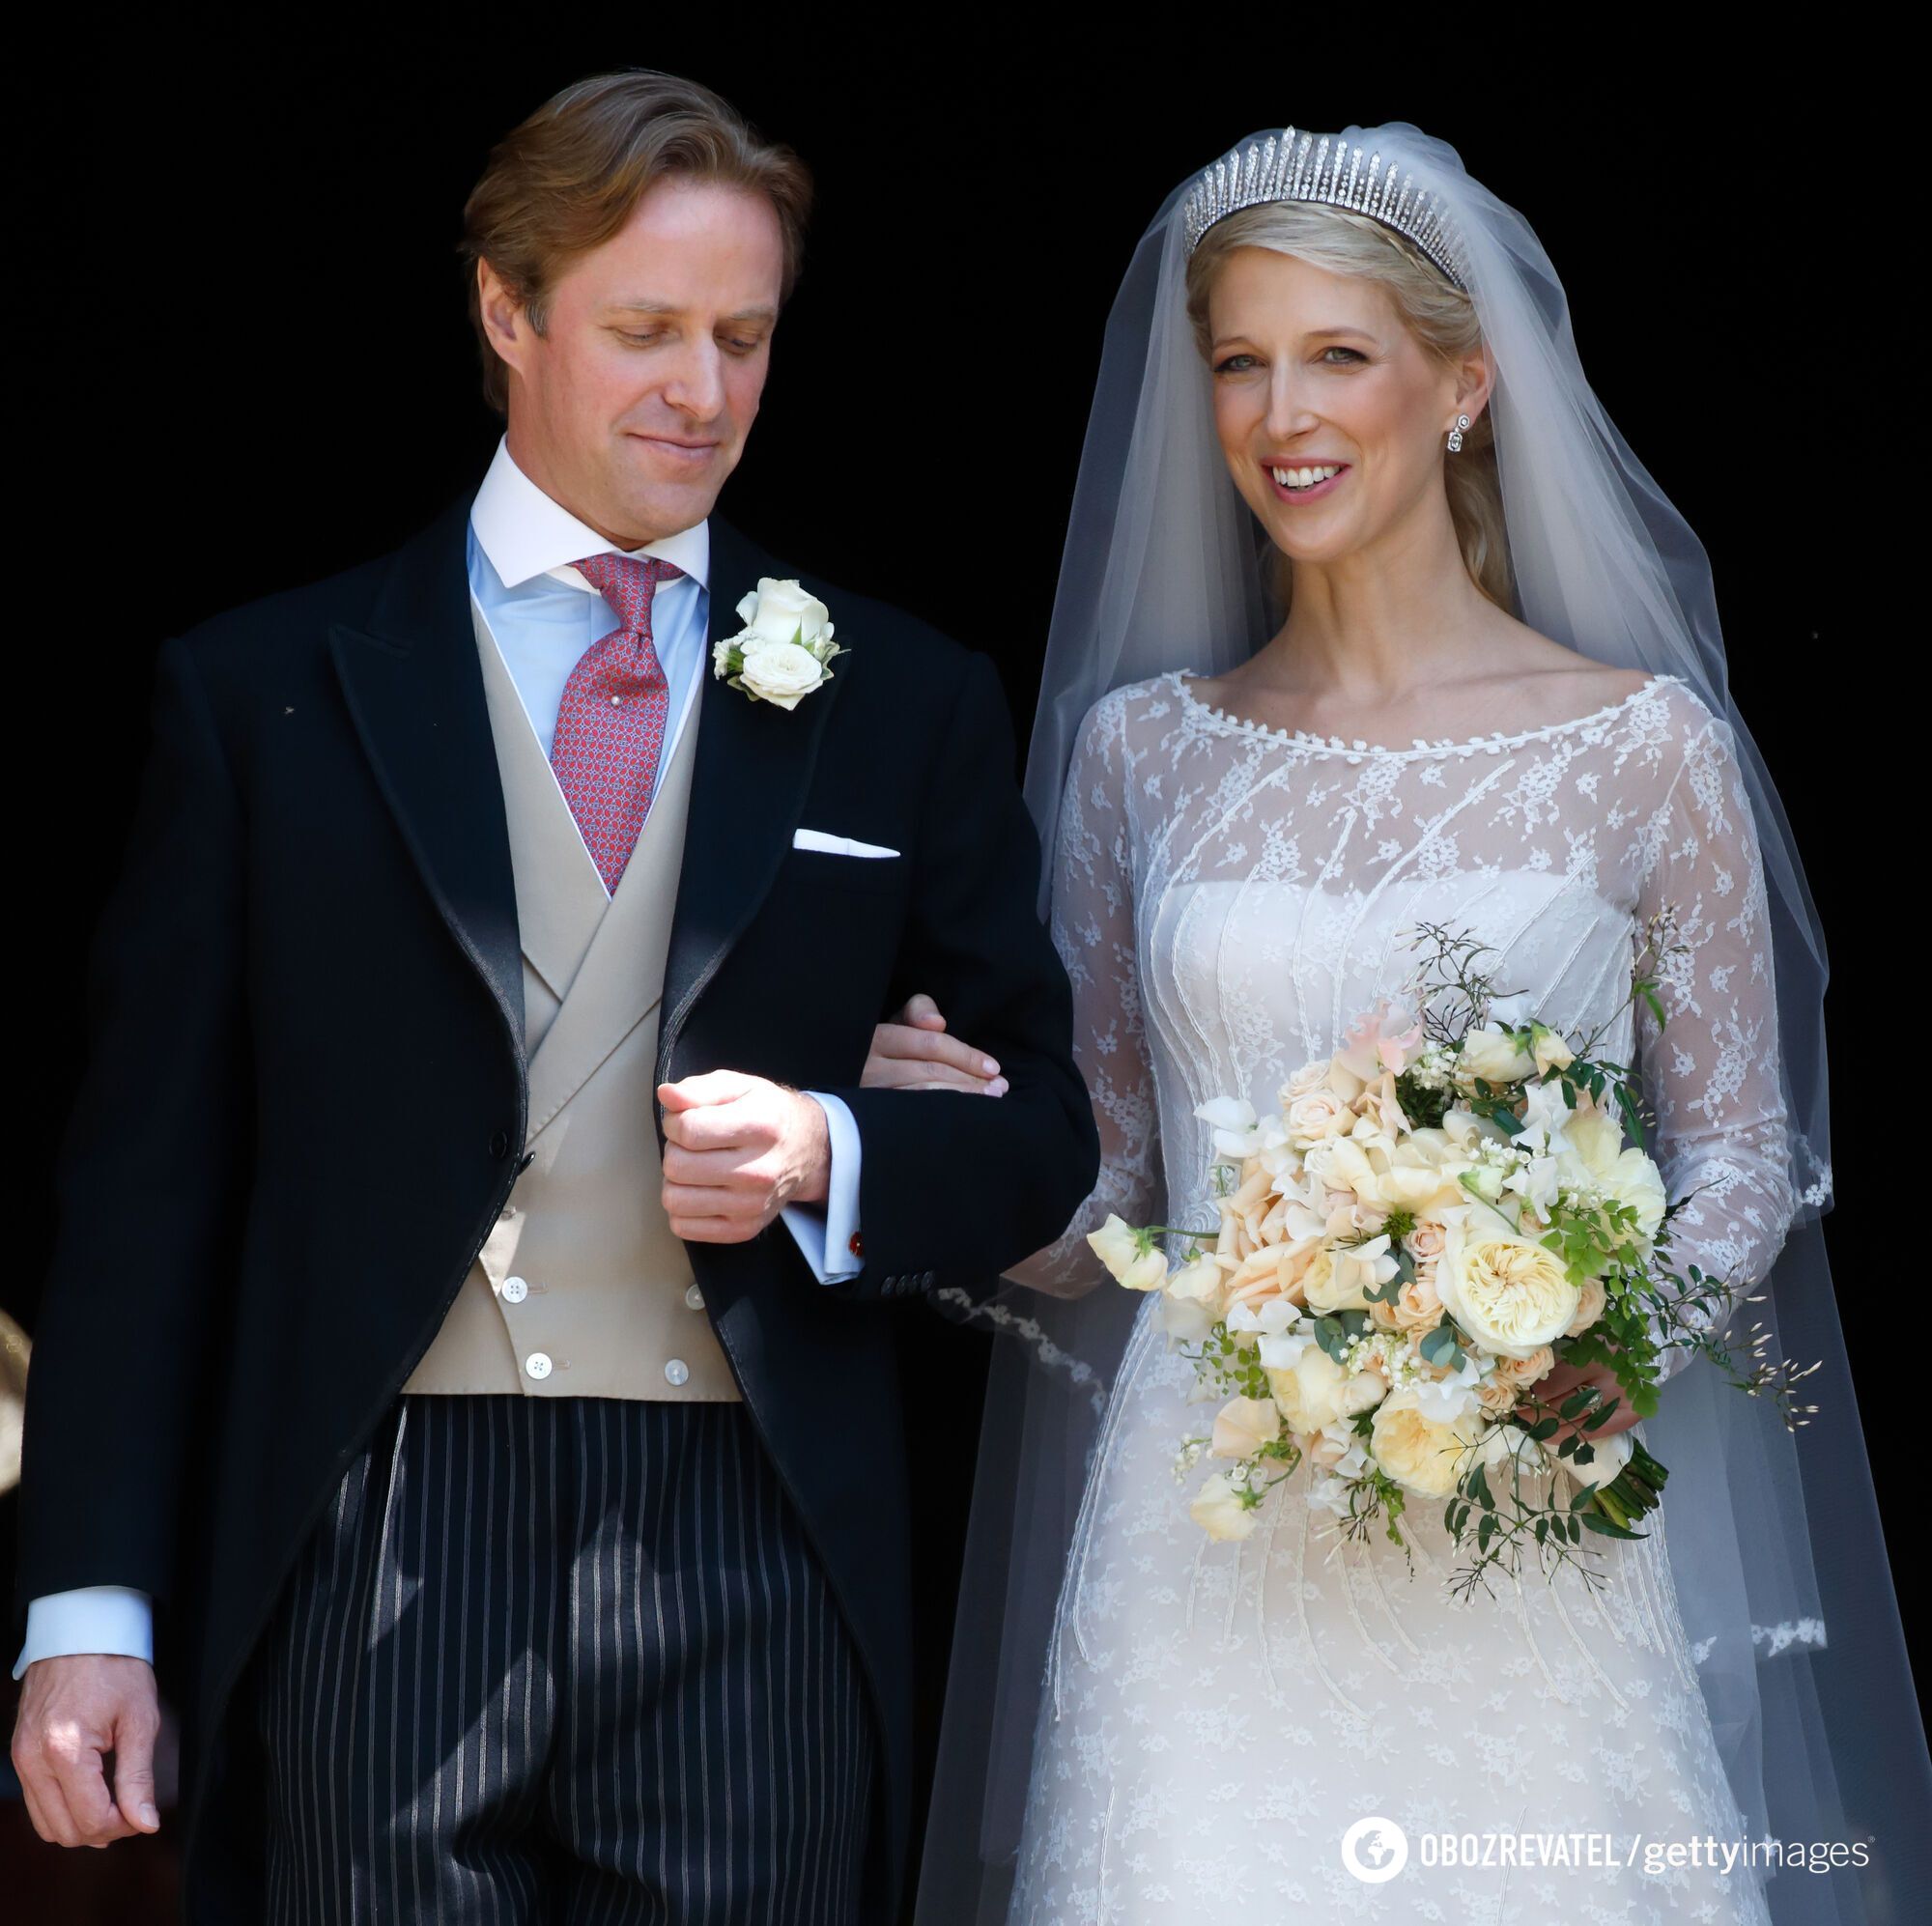 Lady Gabriella Windsor's husband found dead: what is known about Thomas Kingston and why the tragedy came as a shock to the royal family